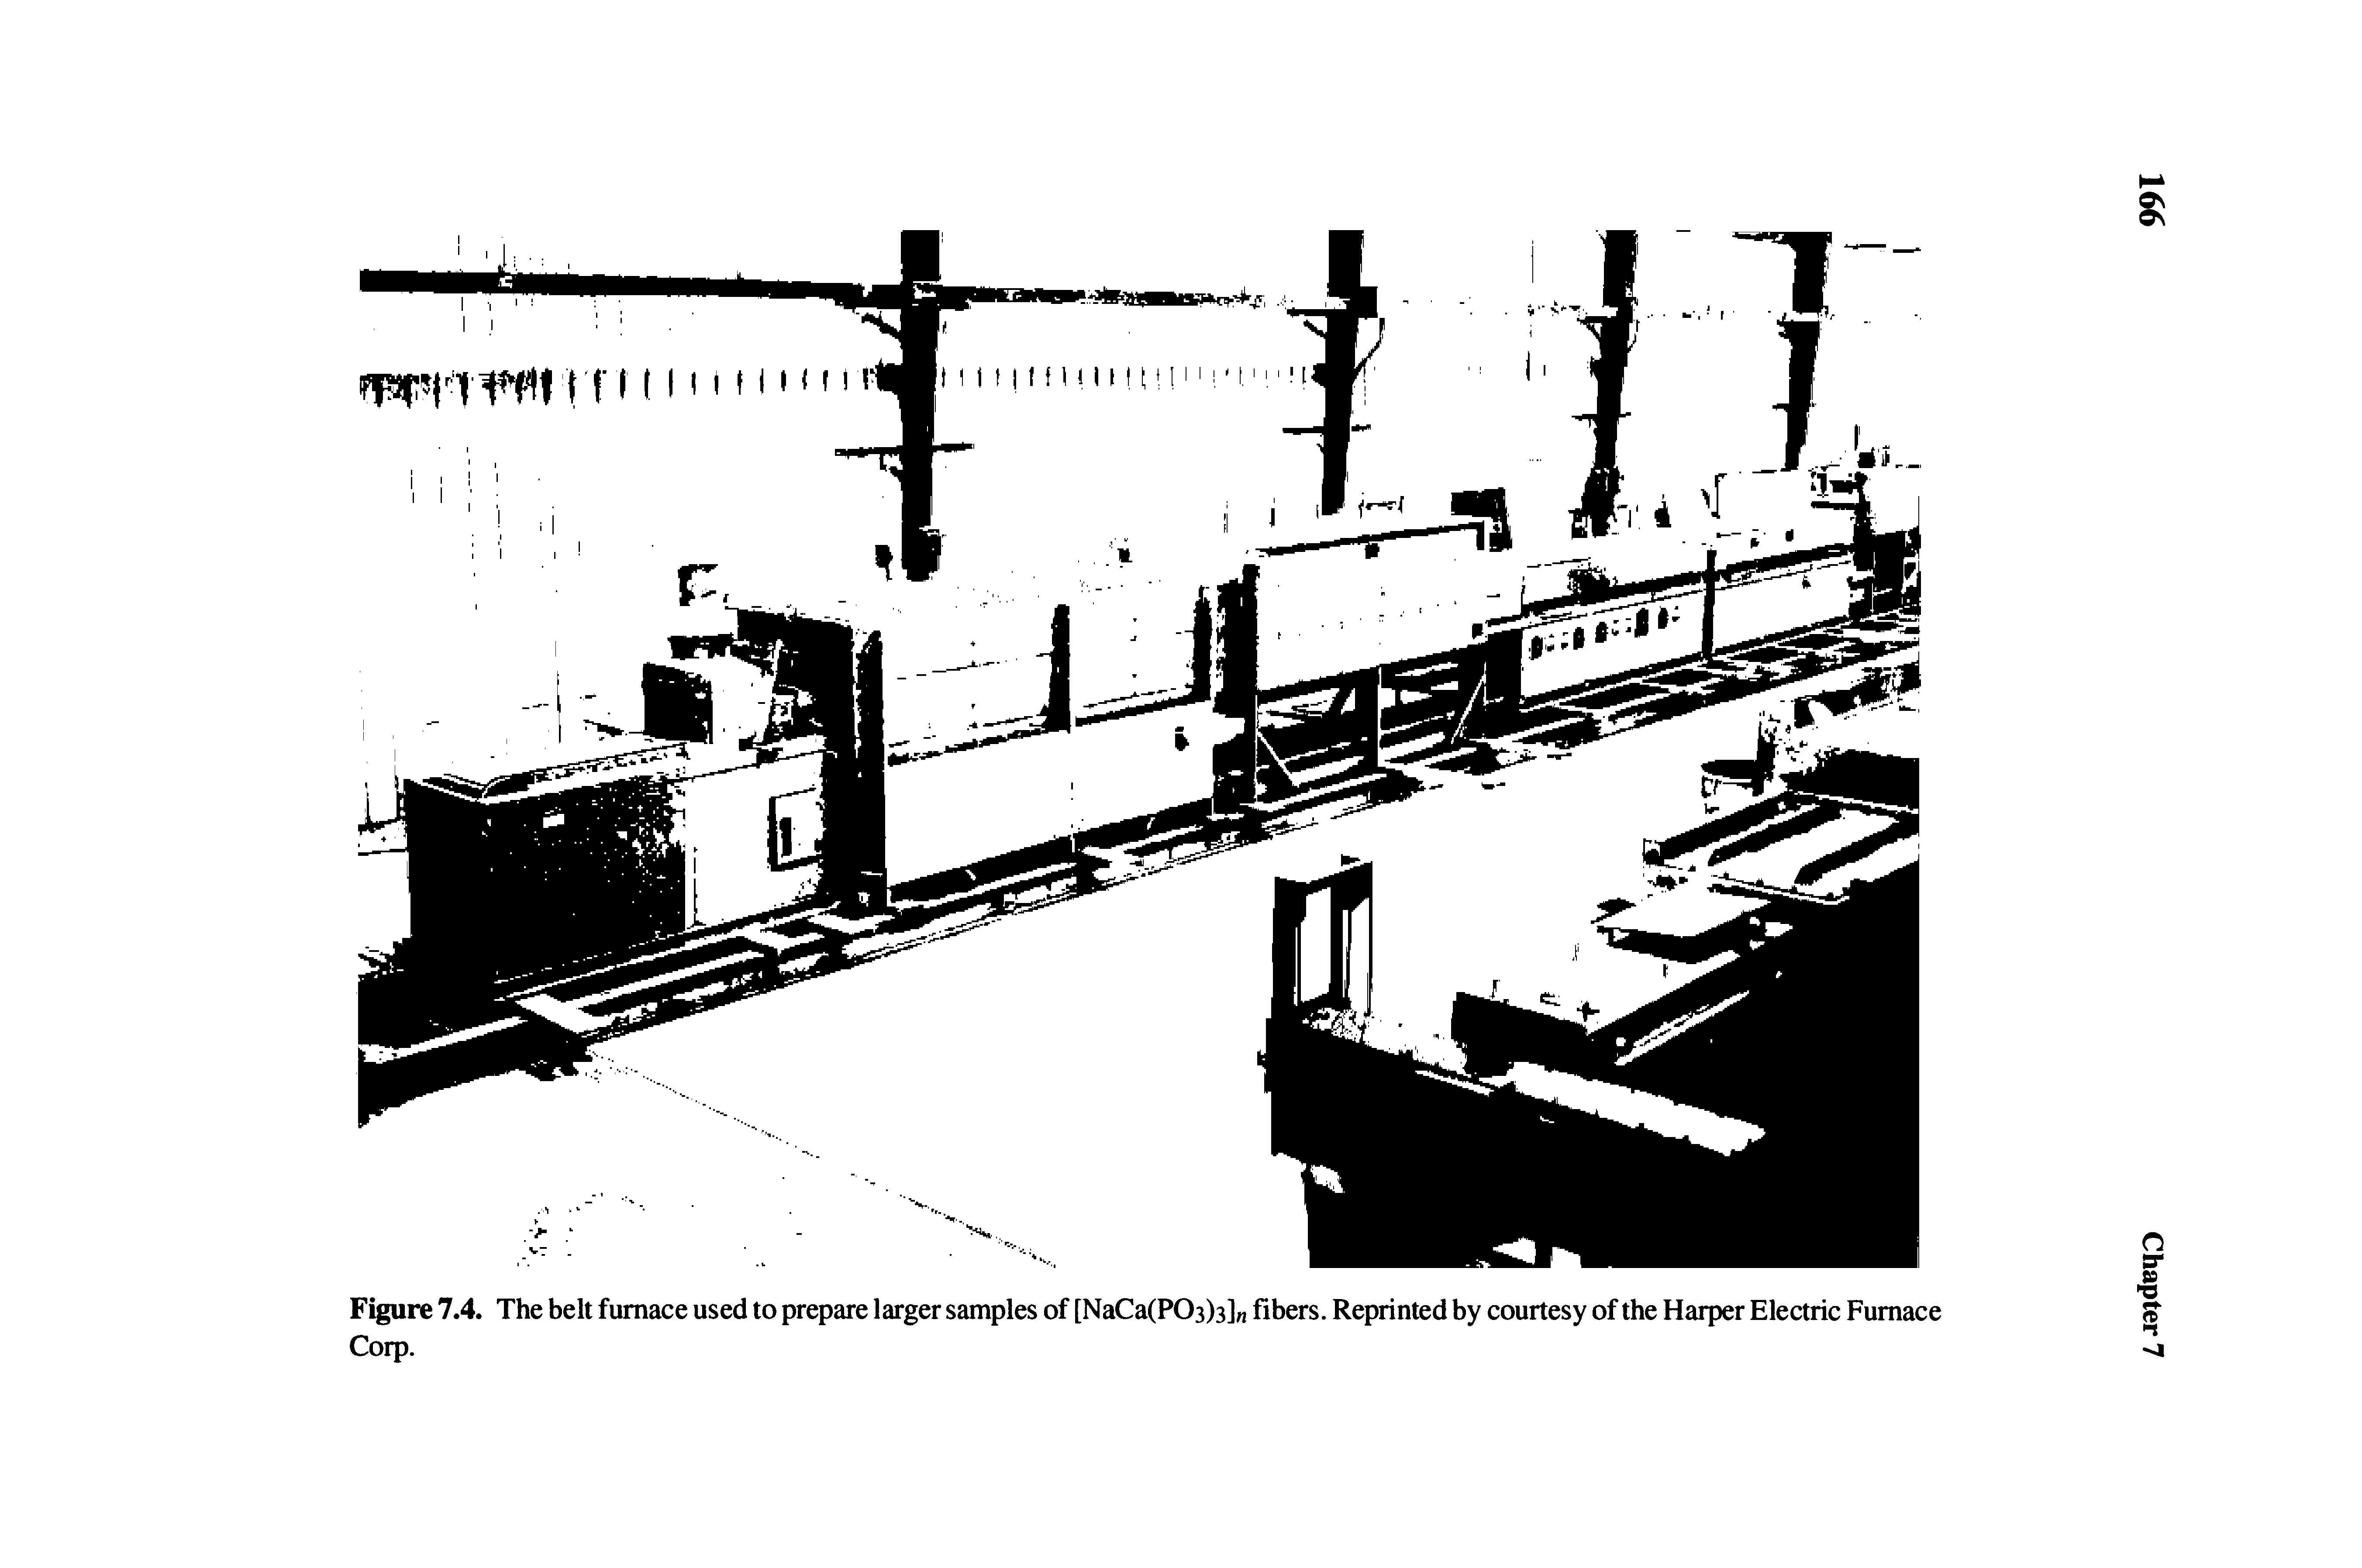 Figure 7.4. The belt furnace used to prepare larger samples of [NaCa(P03)3] fibers. Reprinted by courtesy of the Harper Electric Furnace Corp.